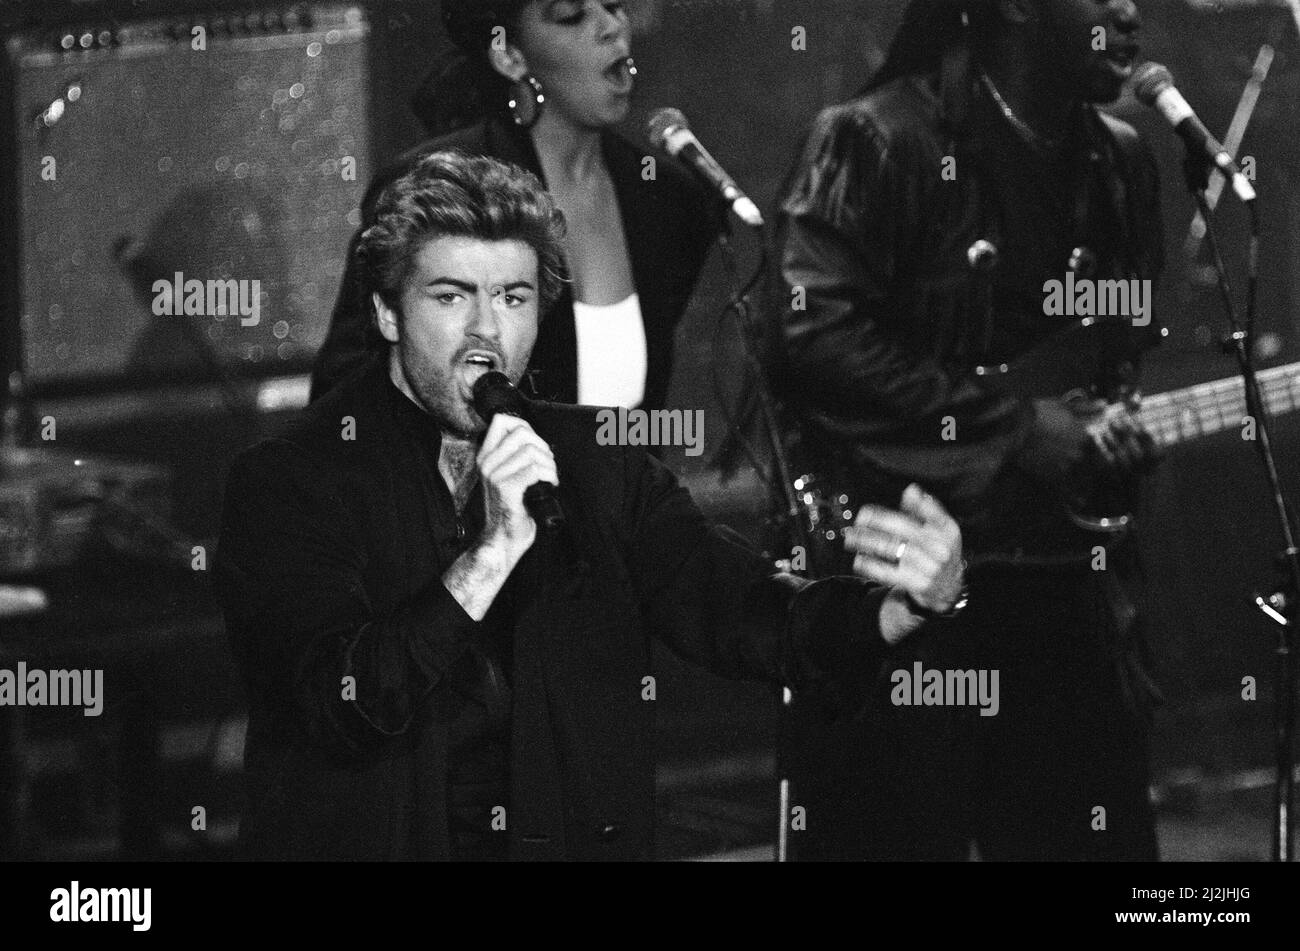 George Michael performing at the Stand by Me: AIDS Day Benefit concert at Wembley Arena, London. 1st April 1987. Stock Photo